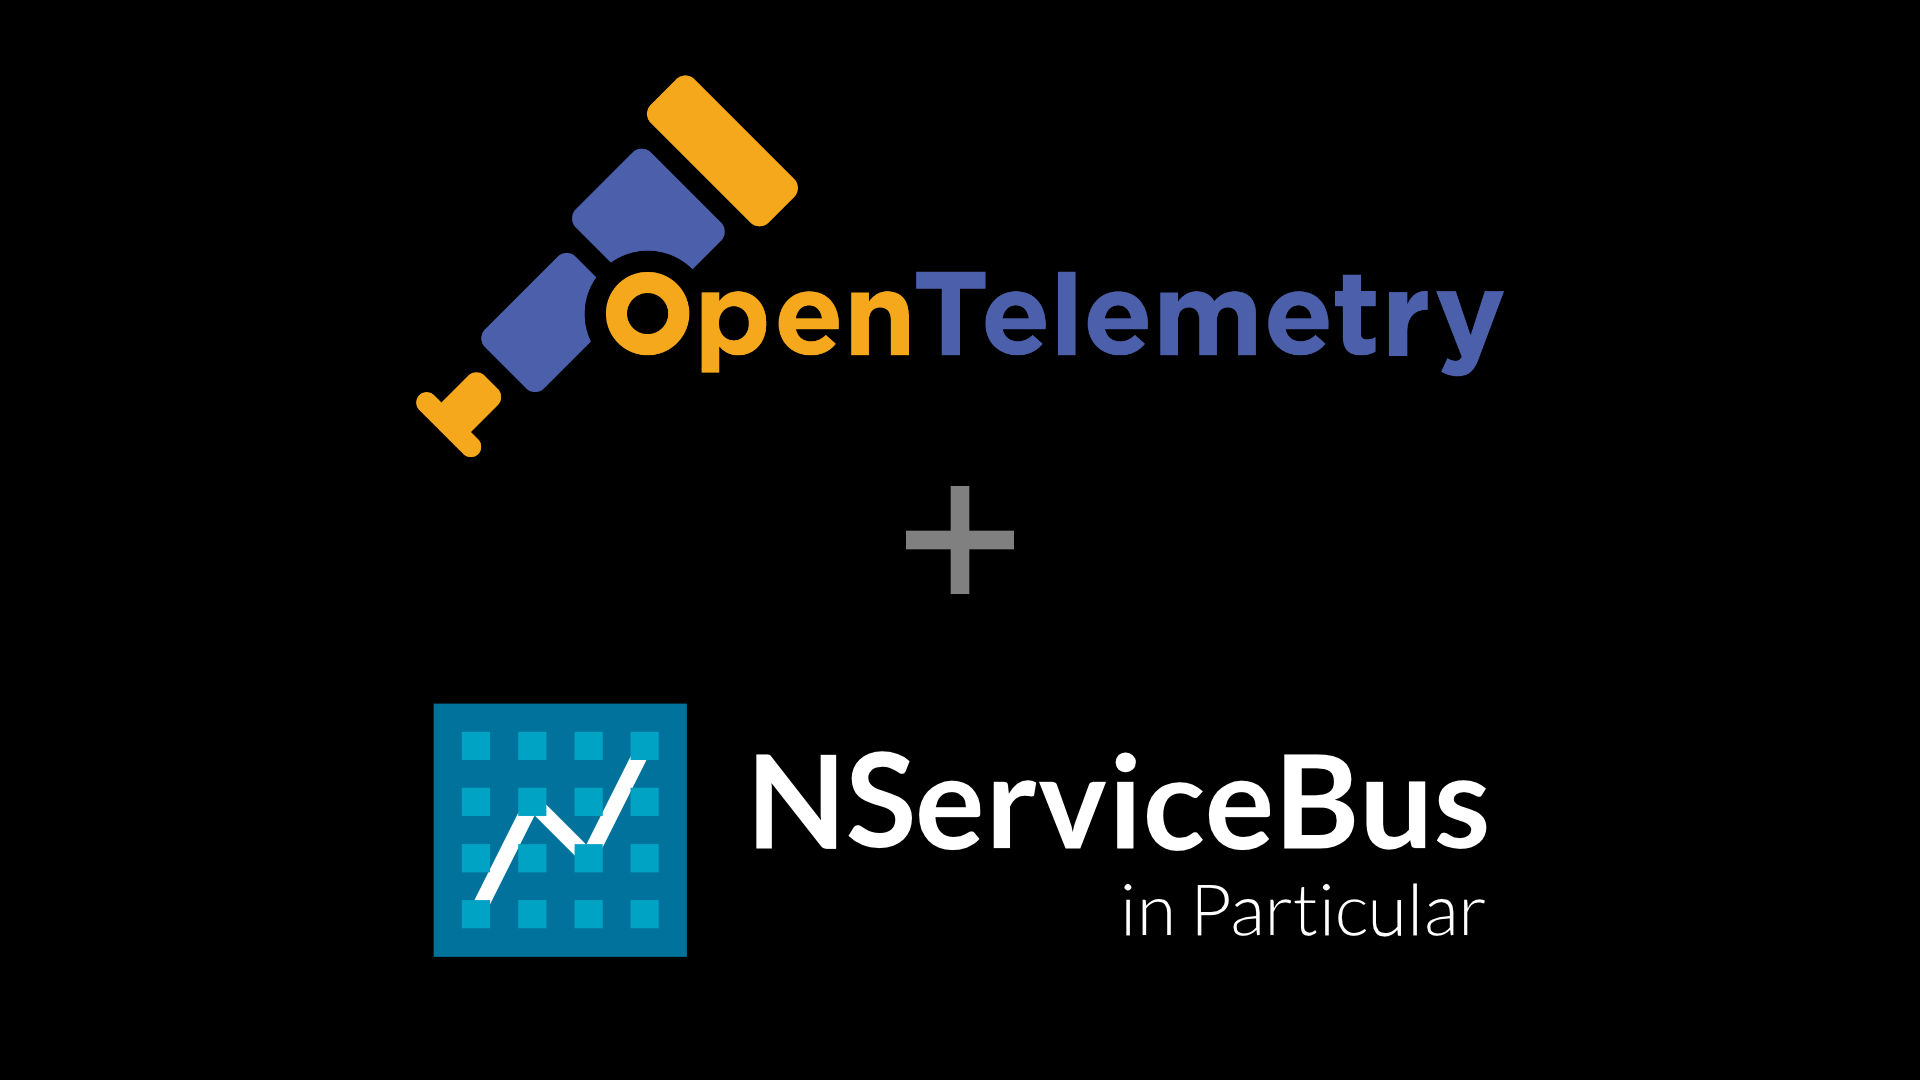 Using OpenTelemetry with NServiceBus